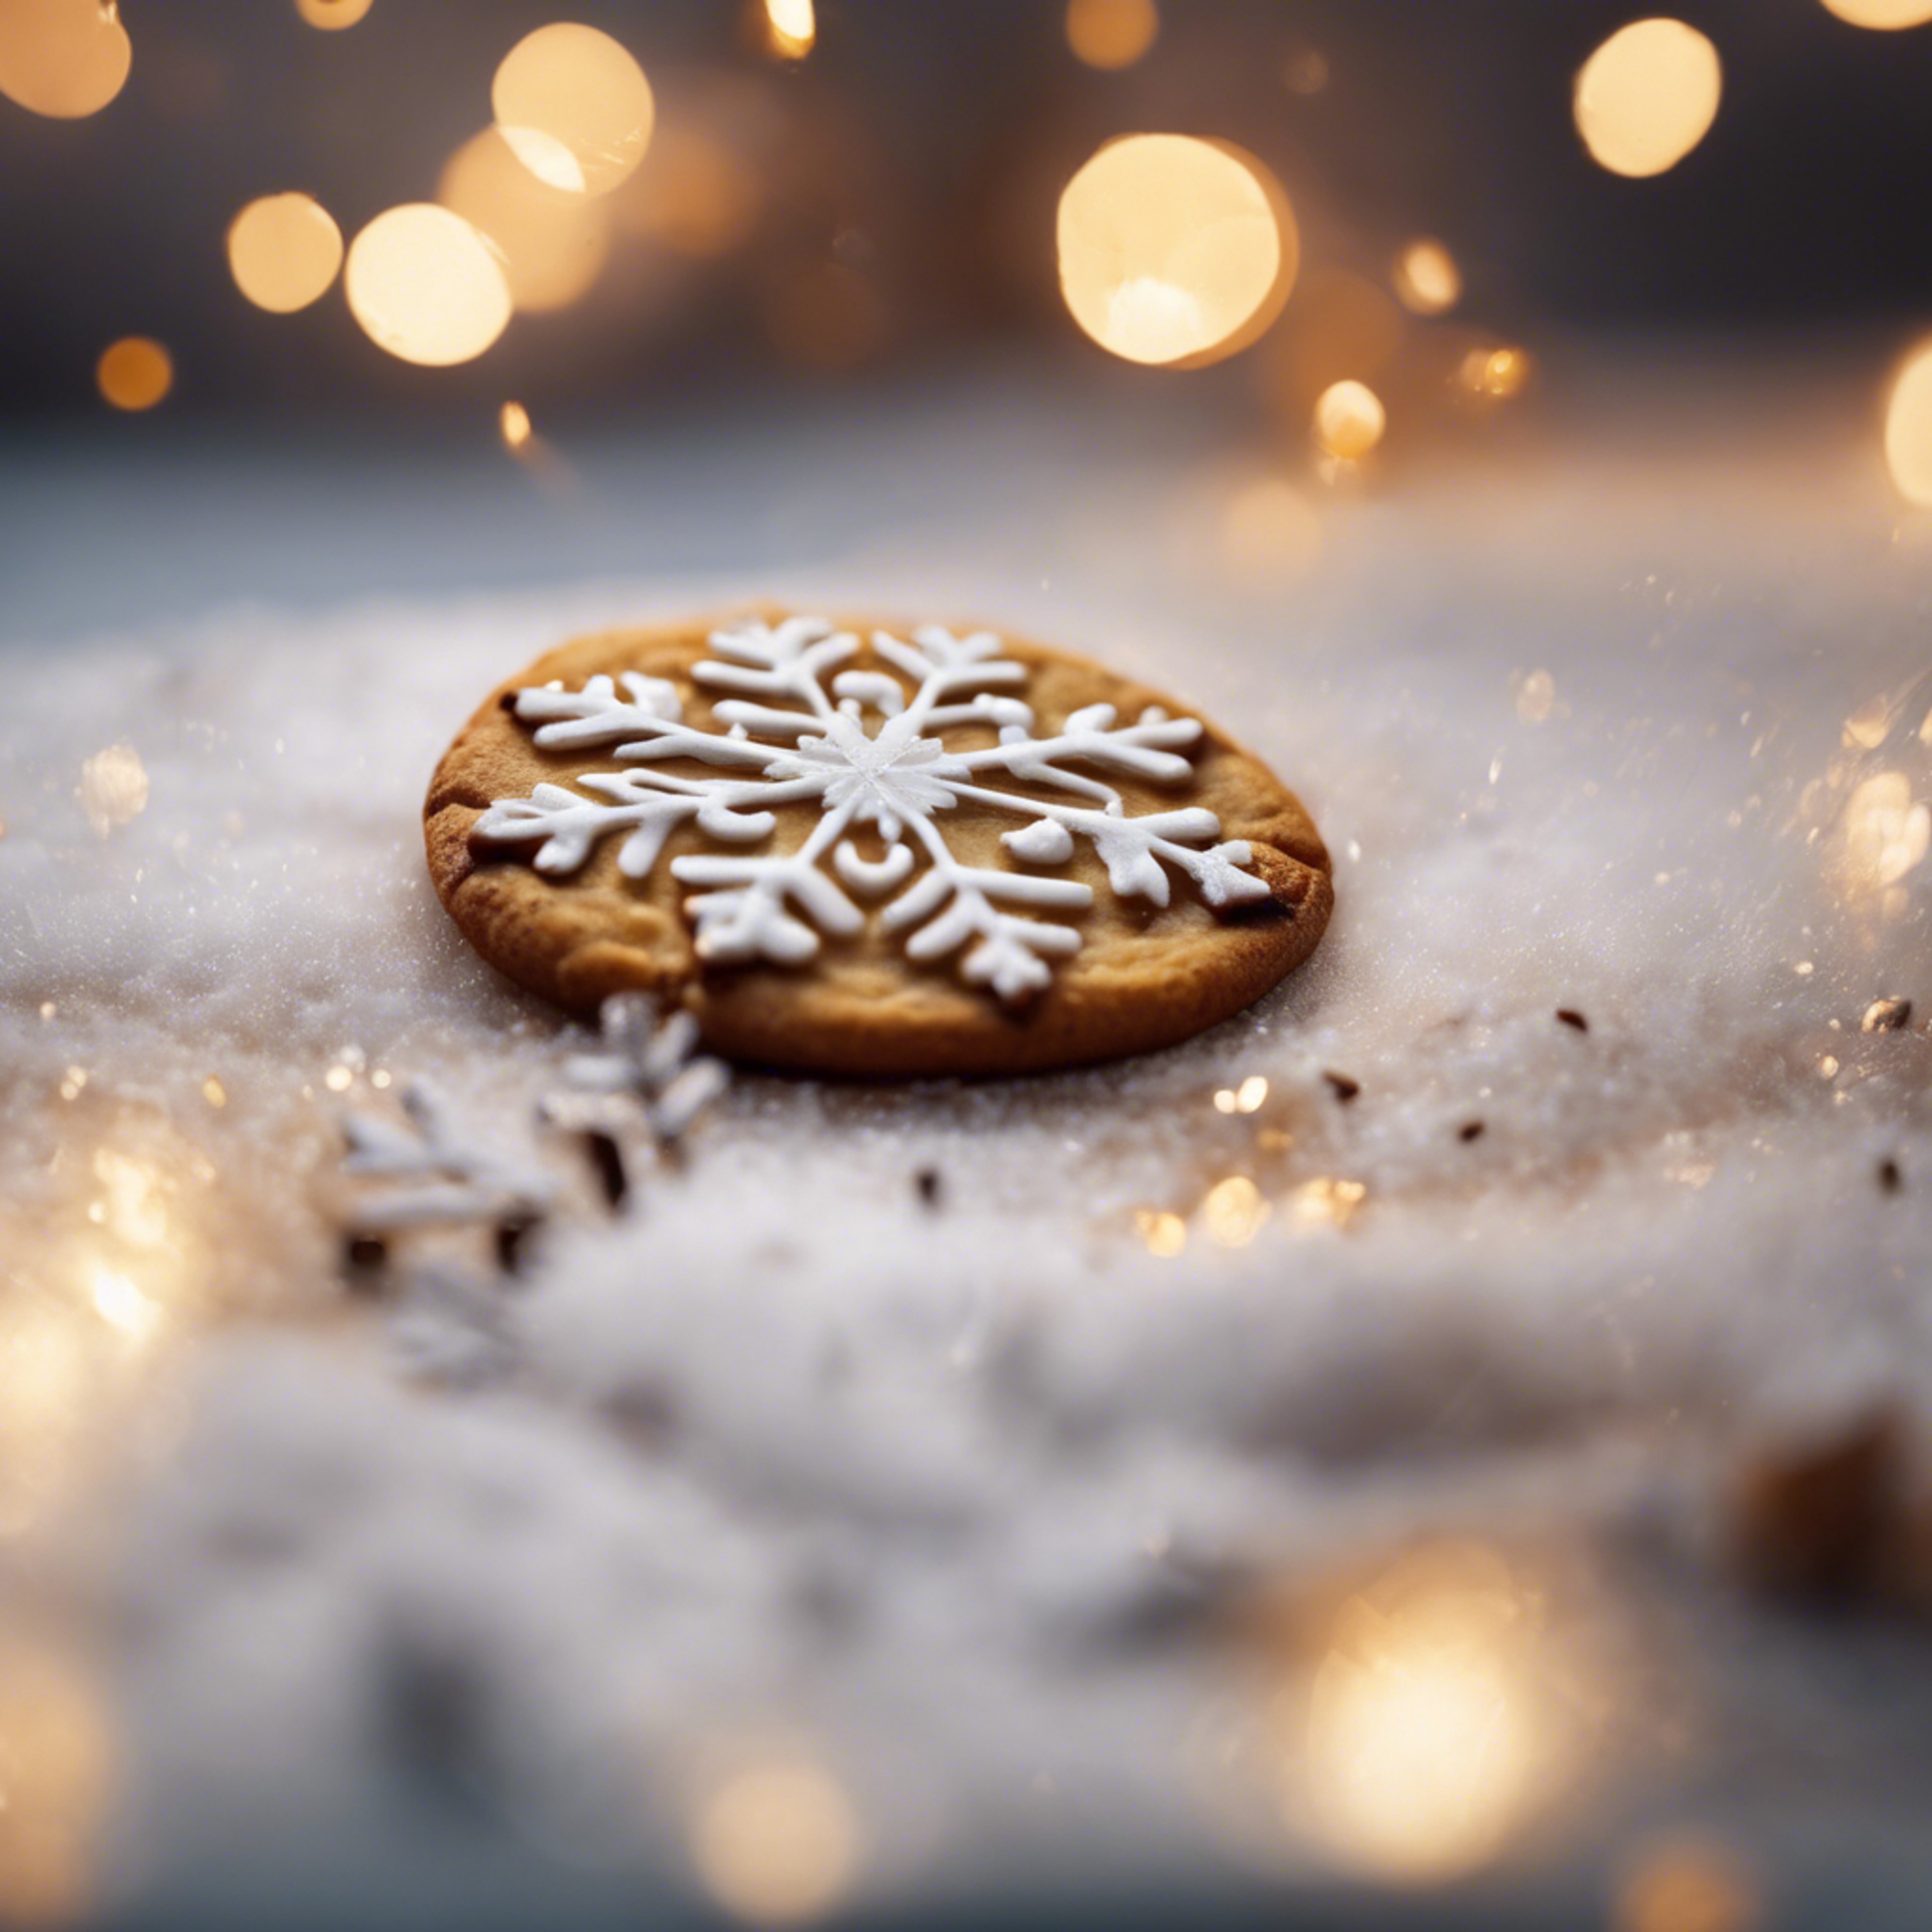 A freshly baked warm cookie with a snowflake landing on it. Wallpaper[89e6bcadefb047bd9a34]